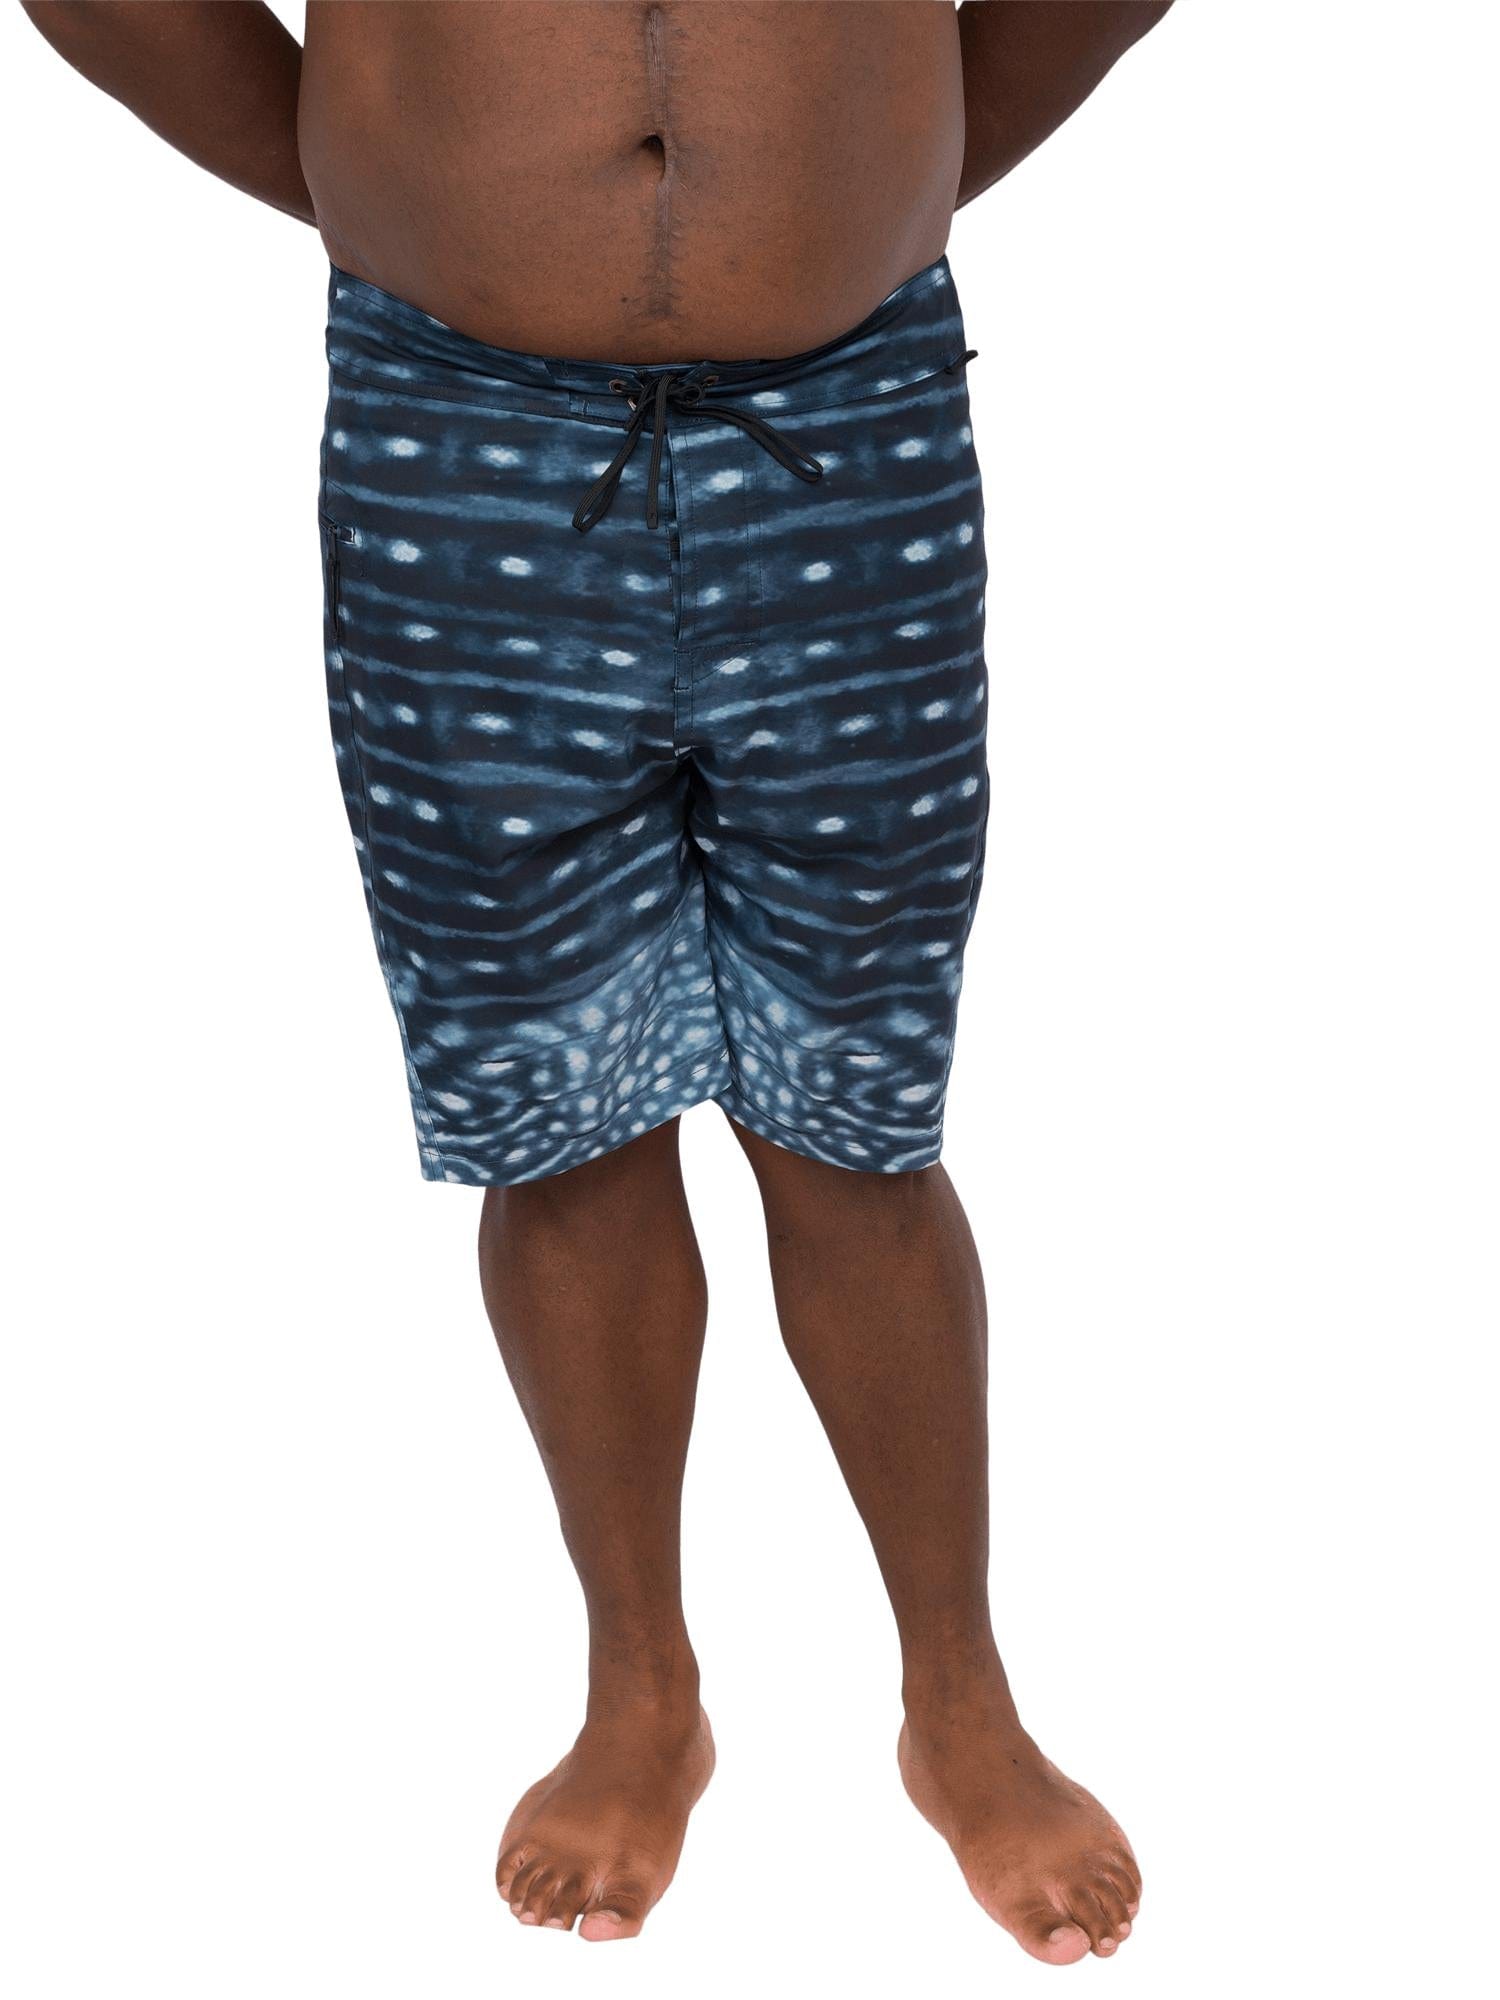 Model: Alex is a fish and wildlife biologist, and science communicator. He is 5’8”, 240 lbs and is wearing size 35 boardshorts.